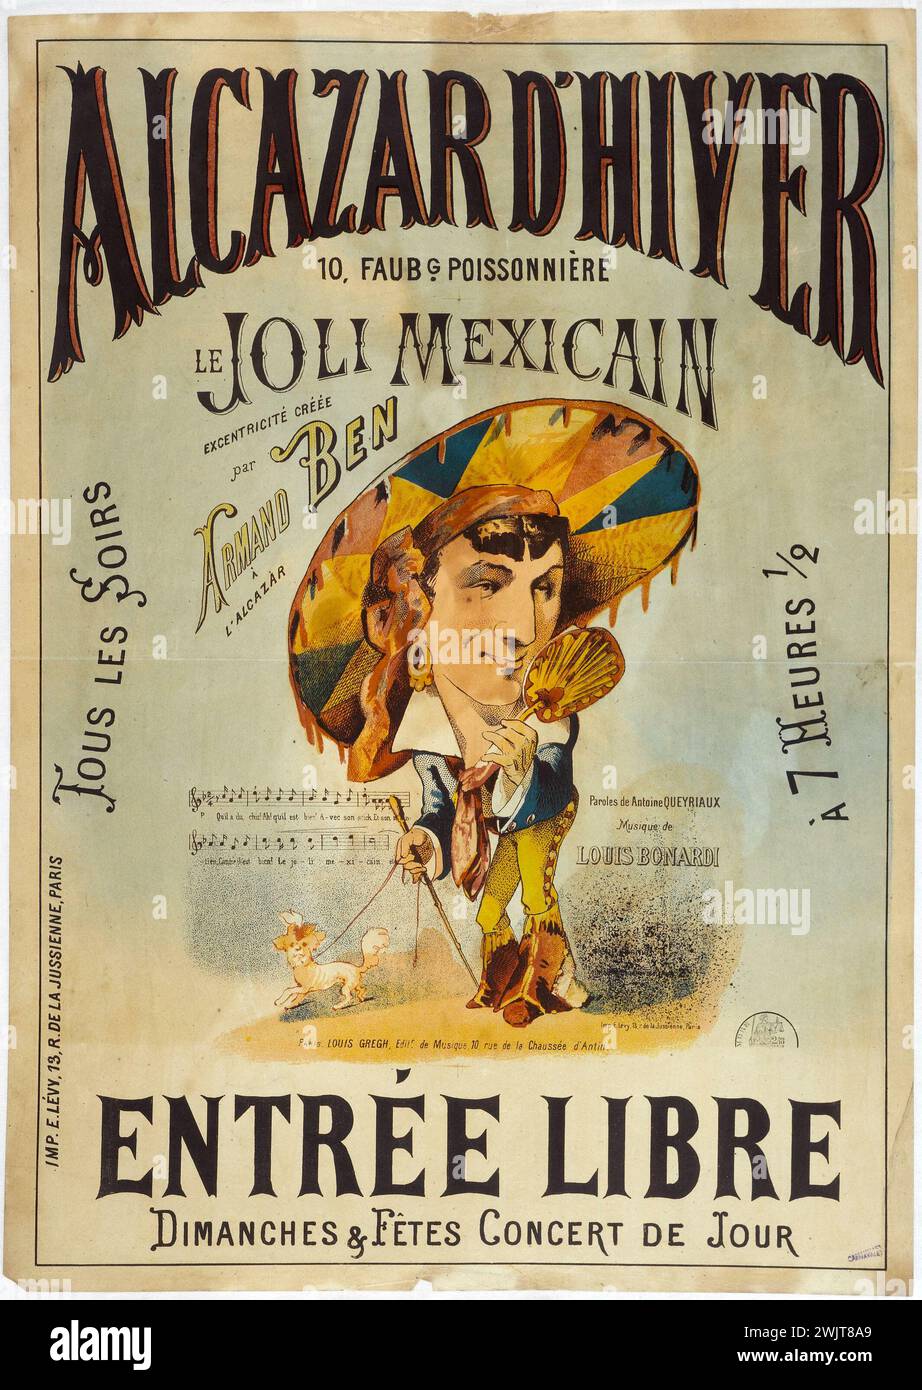 Emile Levy. 'Winter Alcazar, the pretty Mexican by Armand Ben'. Poster. Color lithography. Paris, Carnavalet museum. Alcazar summer, poster, champs-elyse, singer, color lithography, advertising, reclam, spectacle, VIIIEM VIII 8th 8 arrondissement, dog Stock Photo